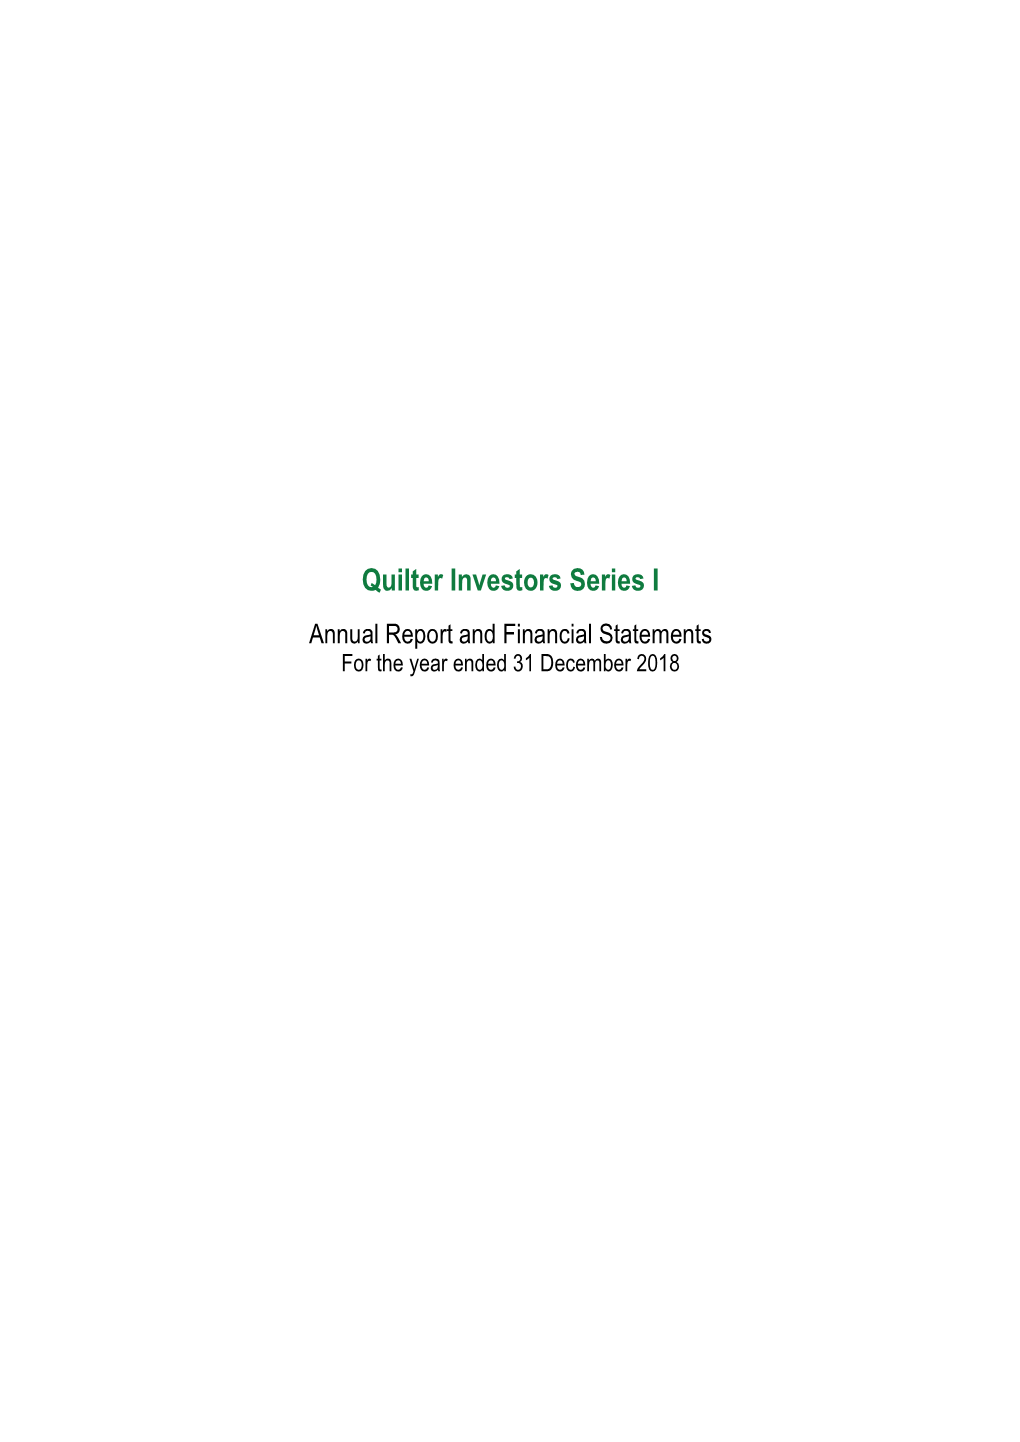 Quilter Investors Series I Annual Report and Financial Statements for the Year Ended 31 December 2018 Quilter Investors Series I